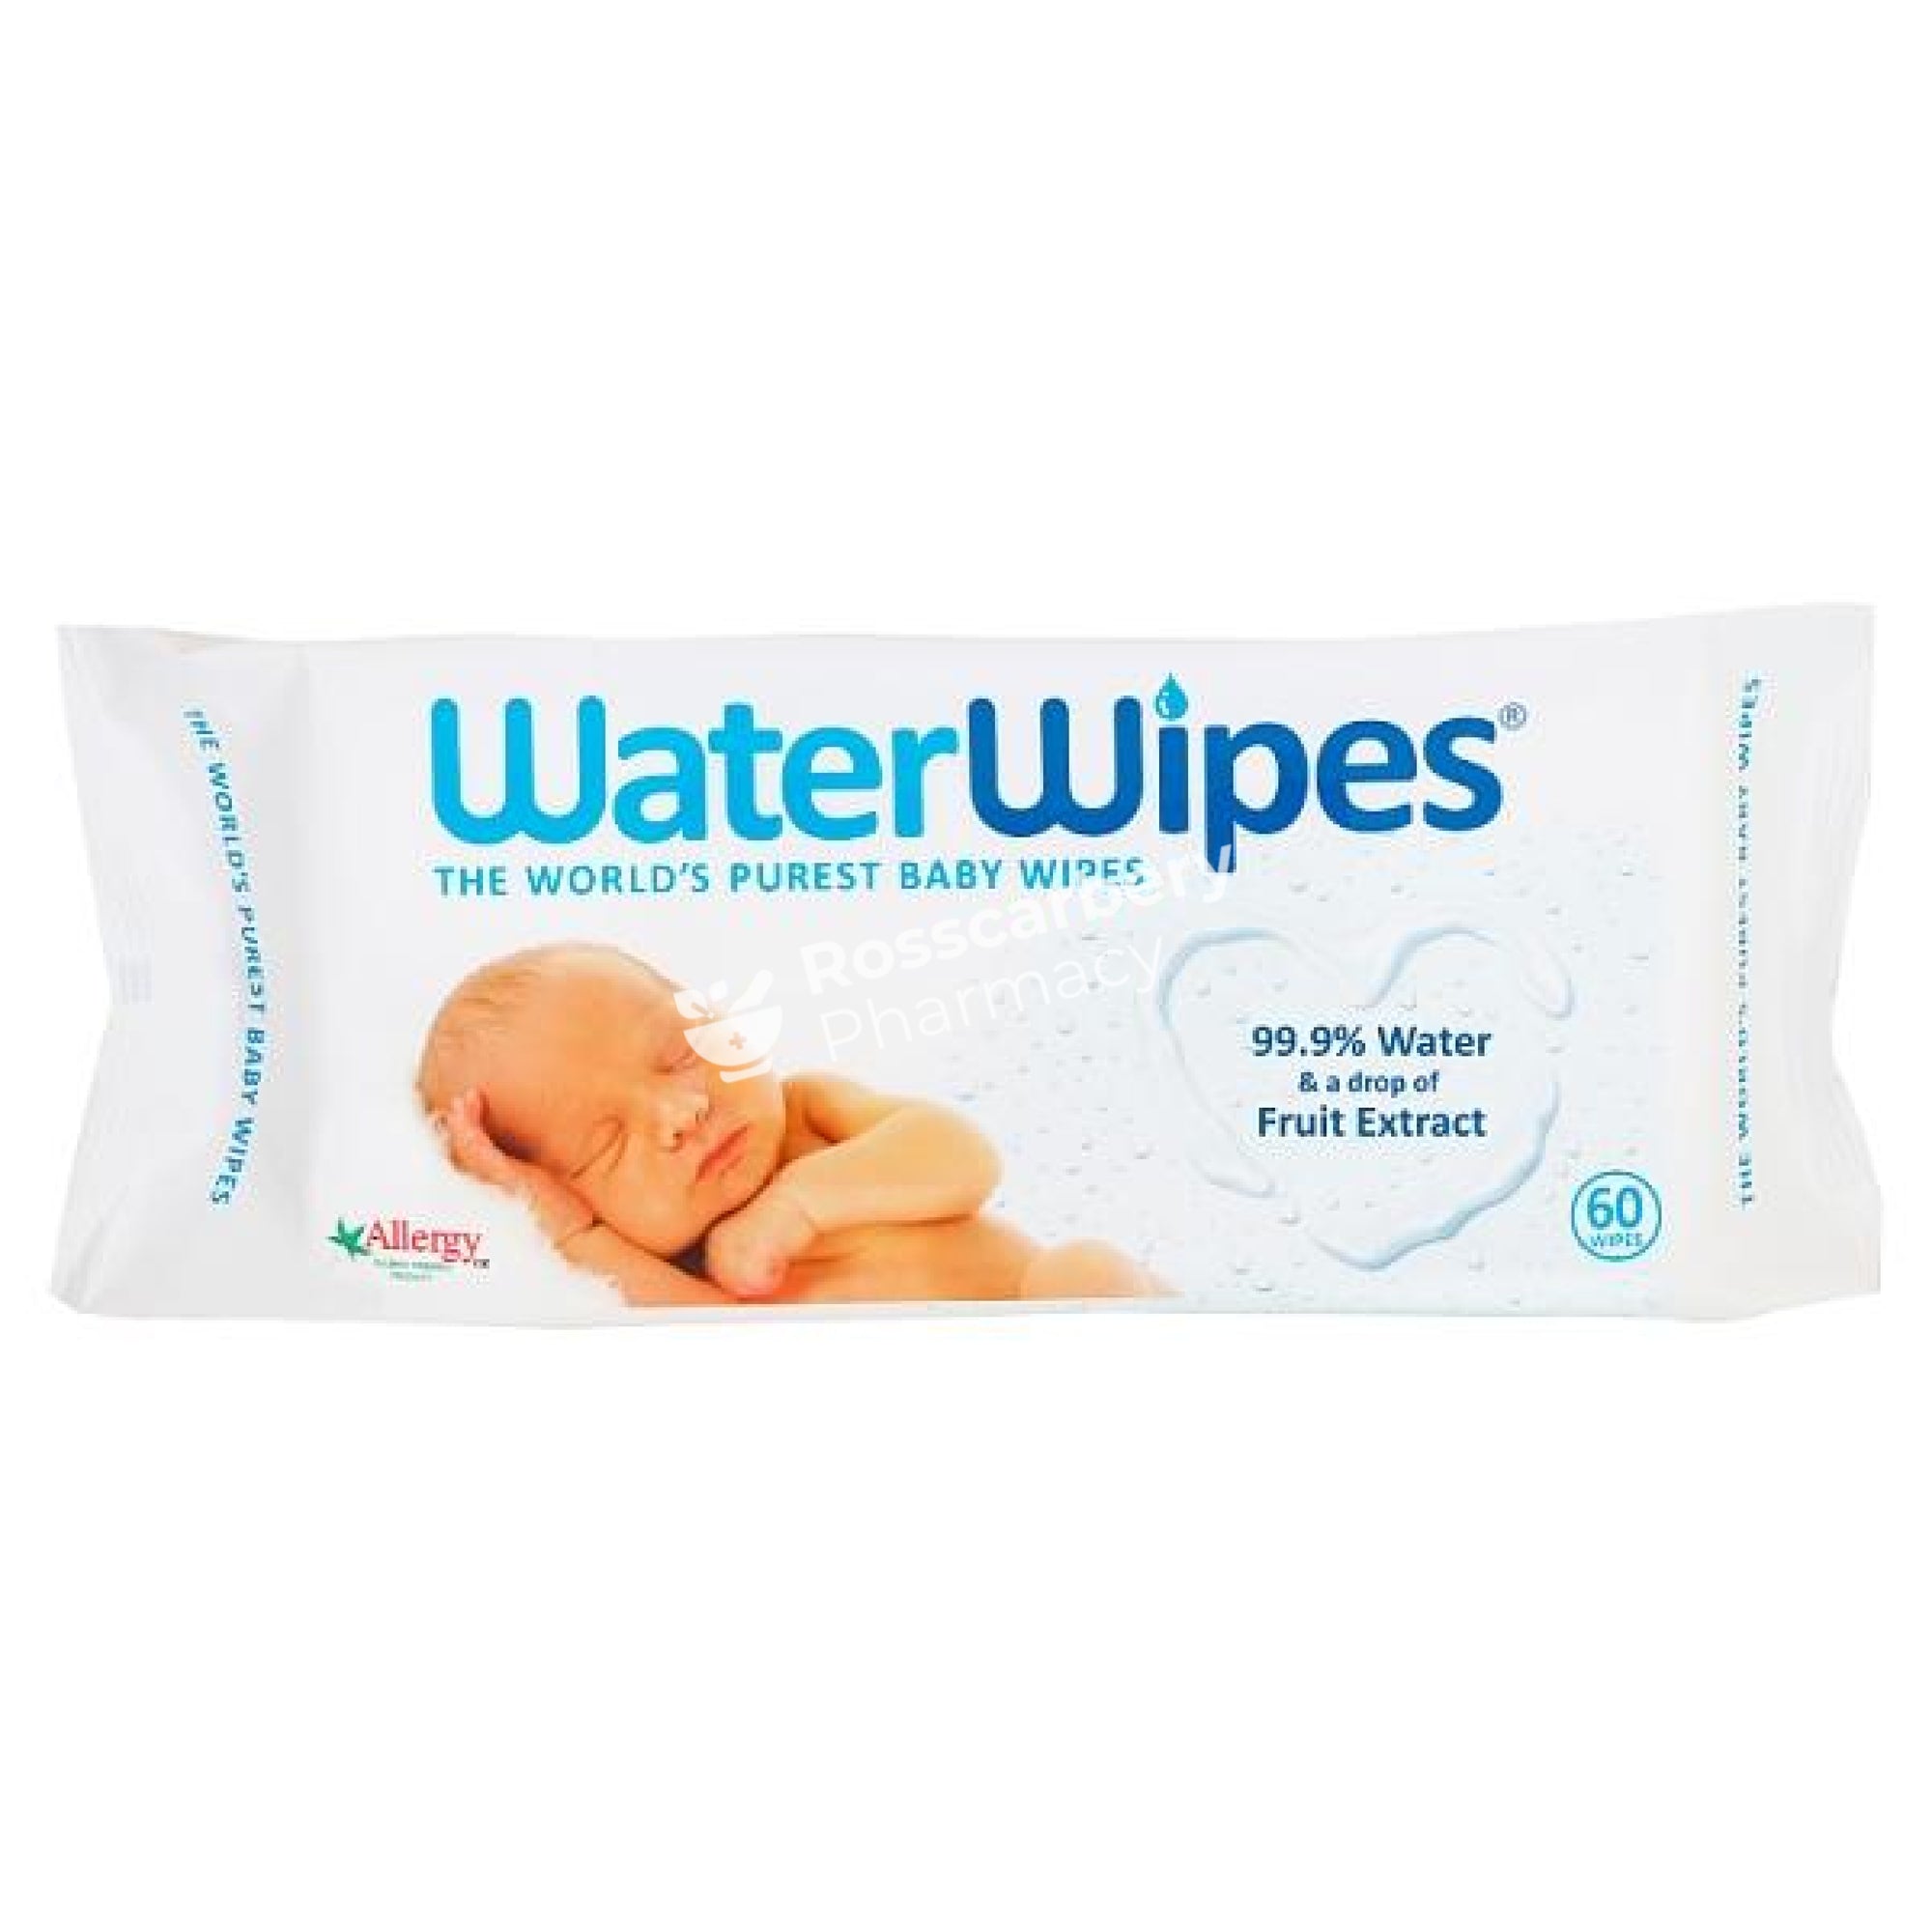 Water Wipes Cotton Wool & Tissues